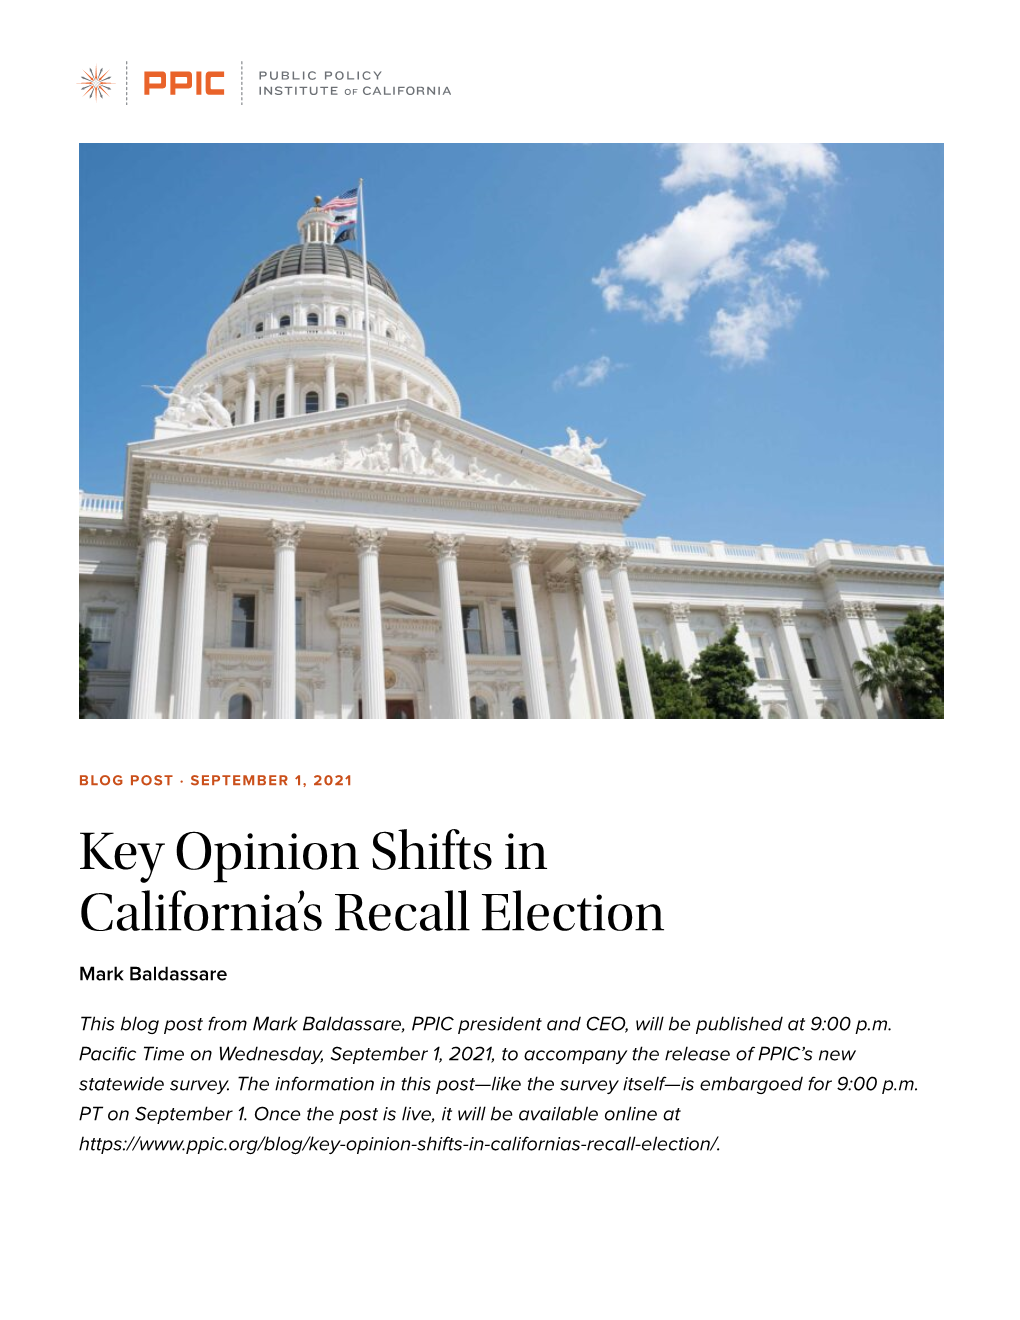 Key Opinion Shifts in California's Recall Election